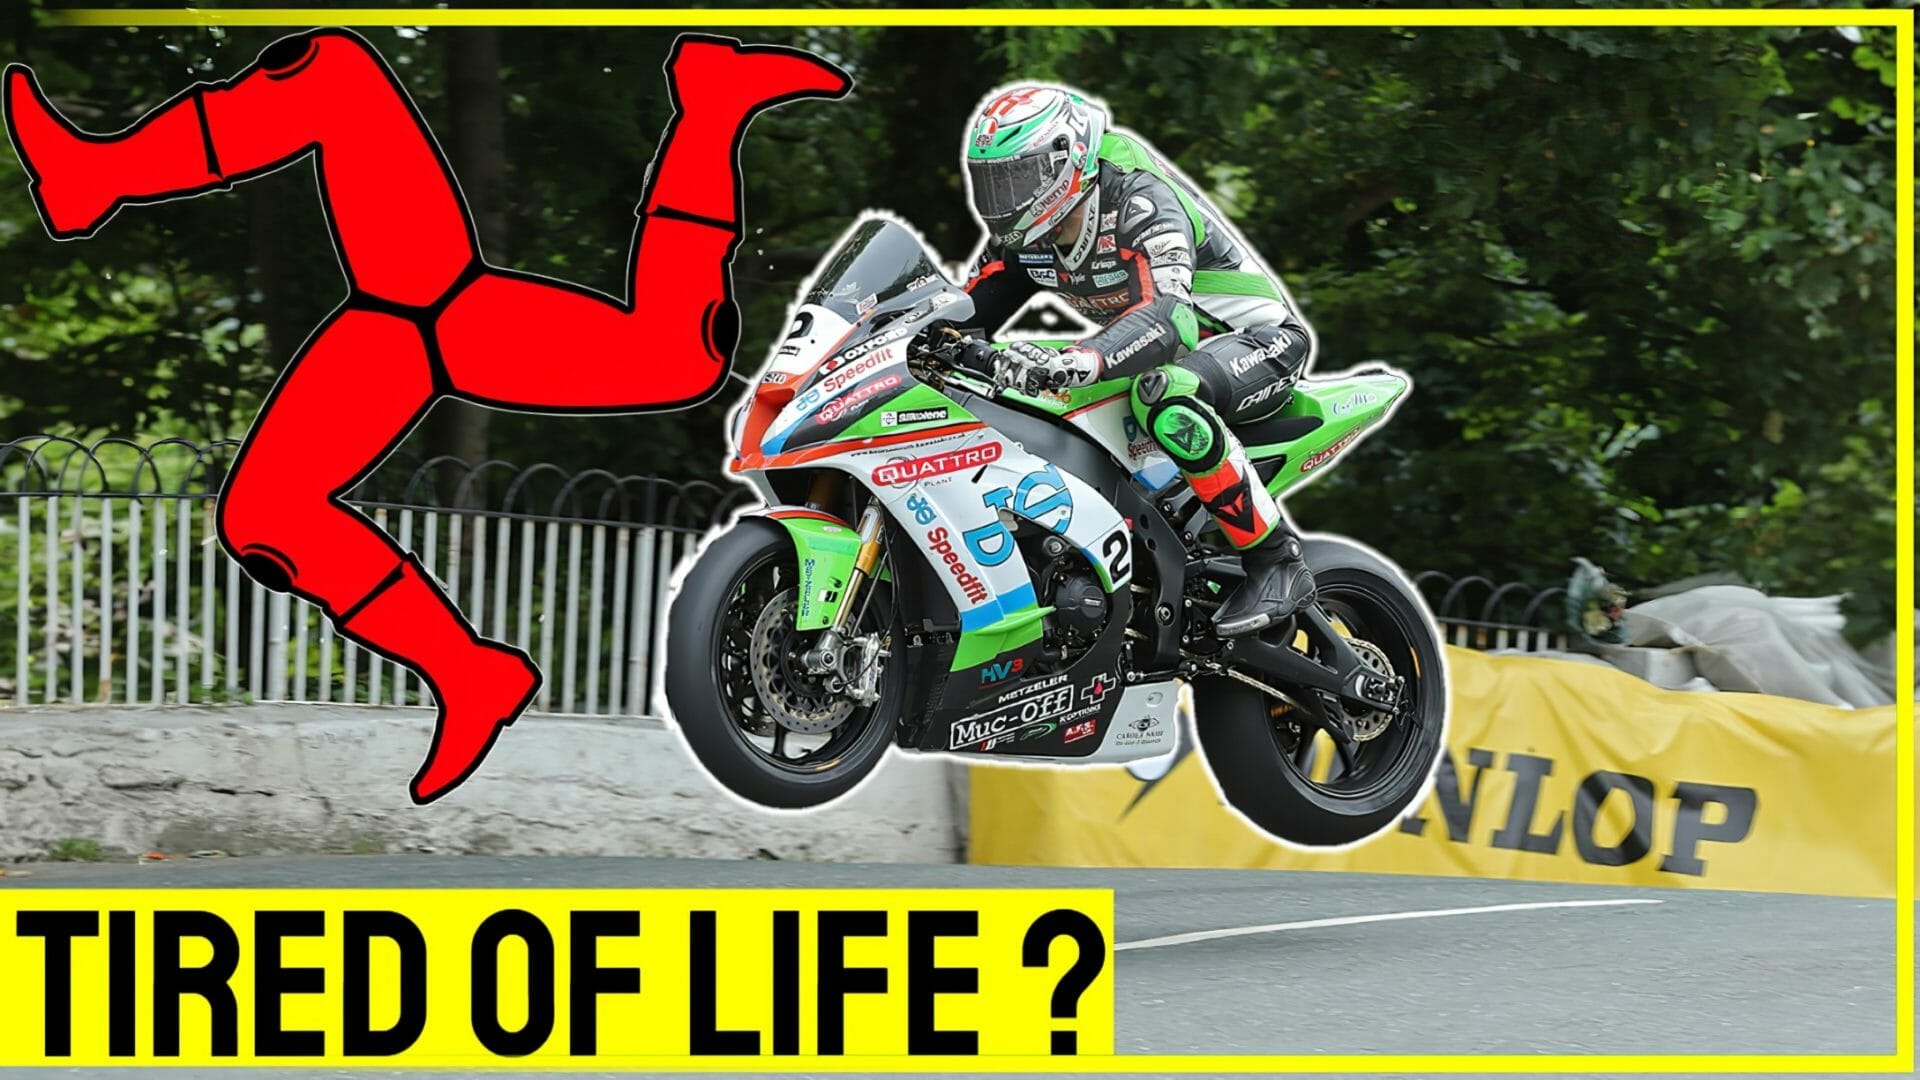 The fascination of the Isle of Man TT: Why do drivers risk their lives here? – Or is that the case at all?